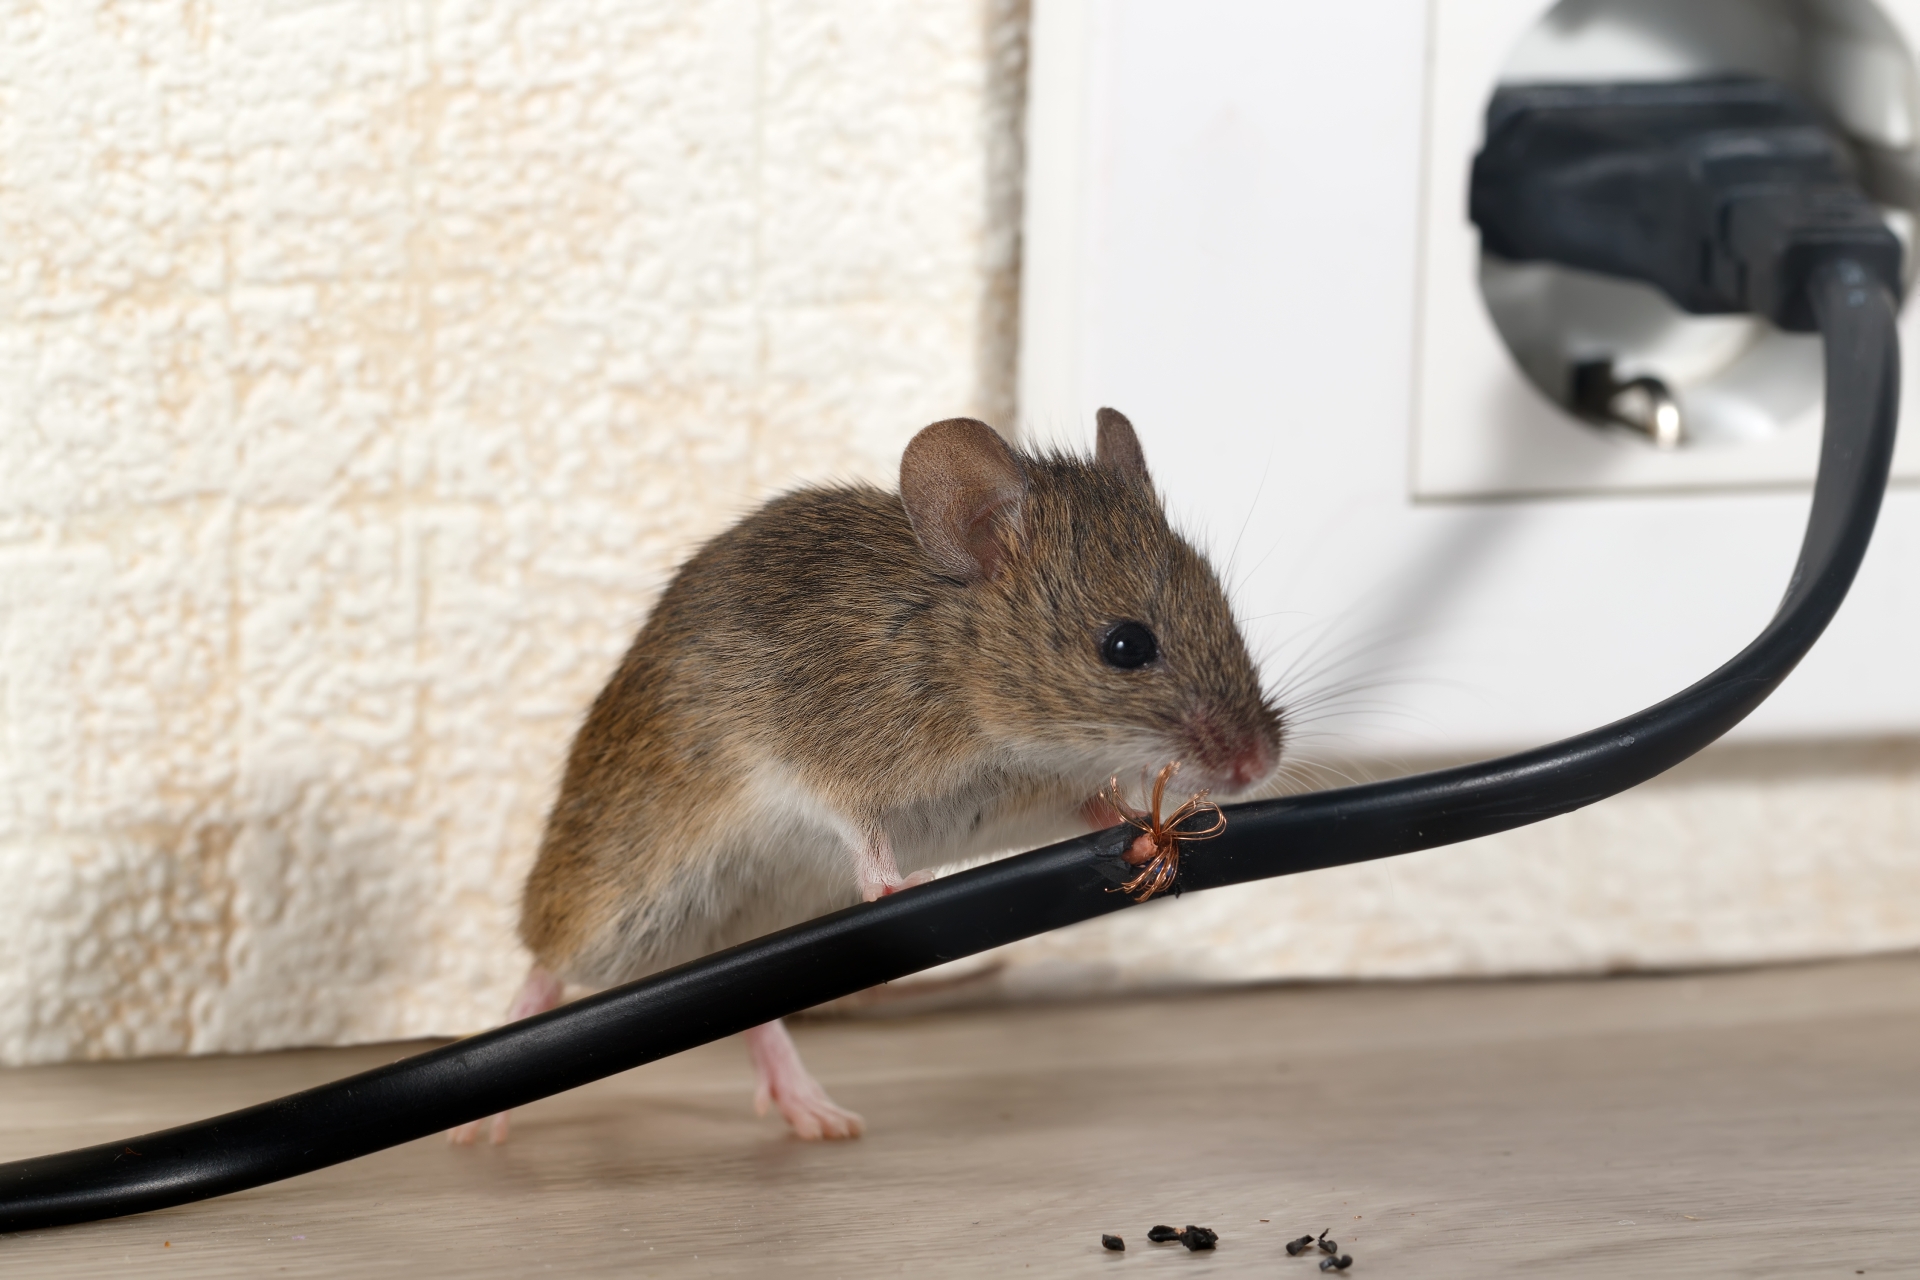 Mice Infestation, Pest Control in Rickmansworth, Chorleywood, Croxley Green, WD3. Call Now 020 8166 9746